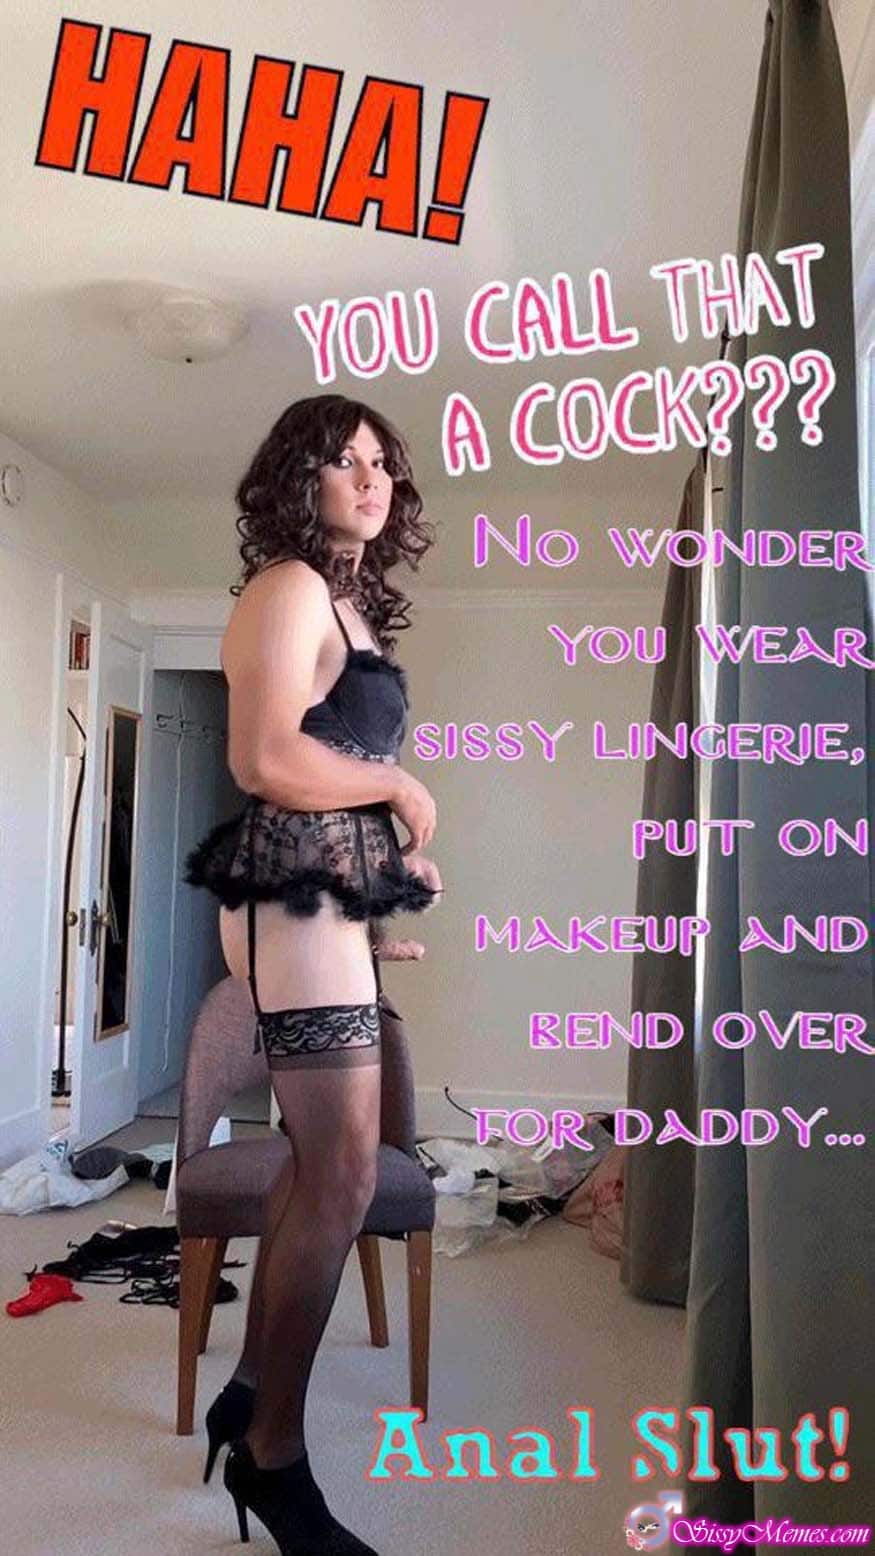 a single look on daddys huge cock makes sissy hard